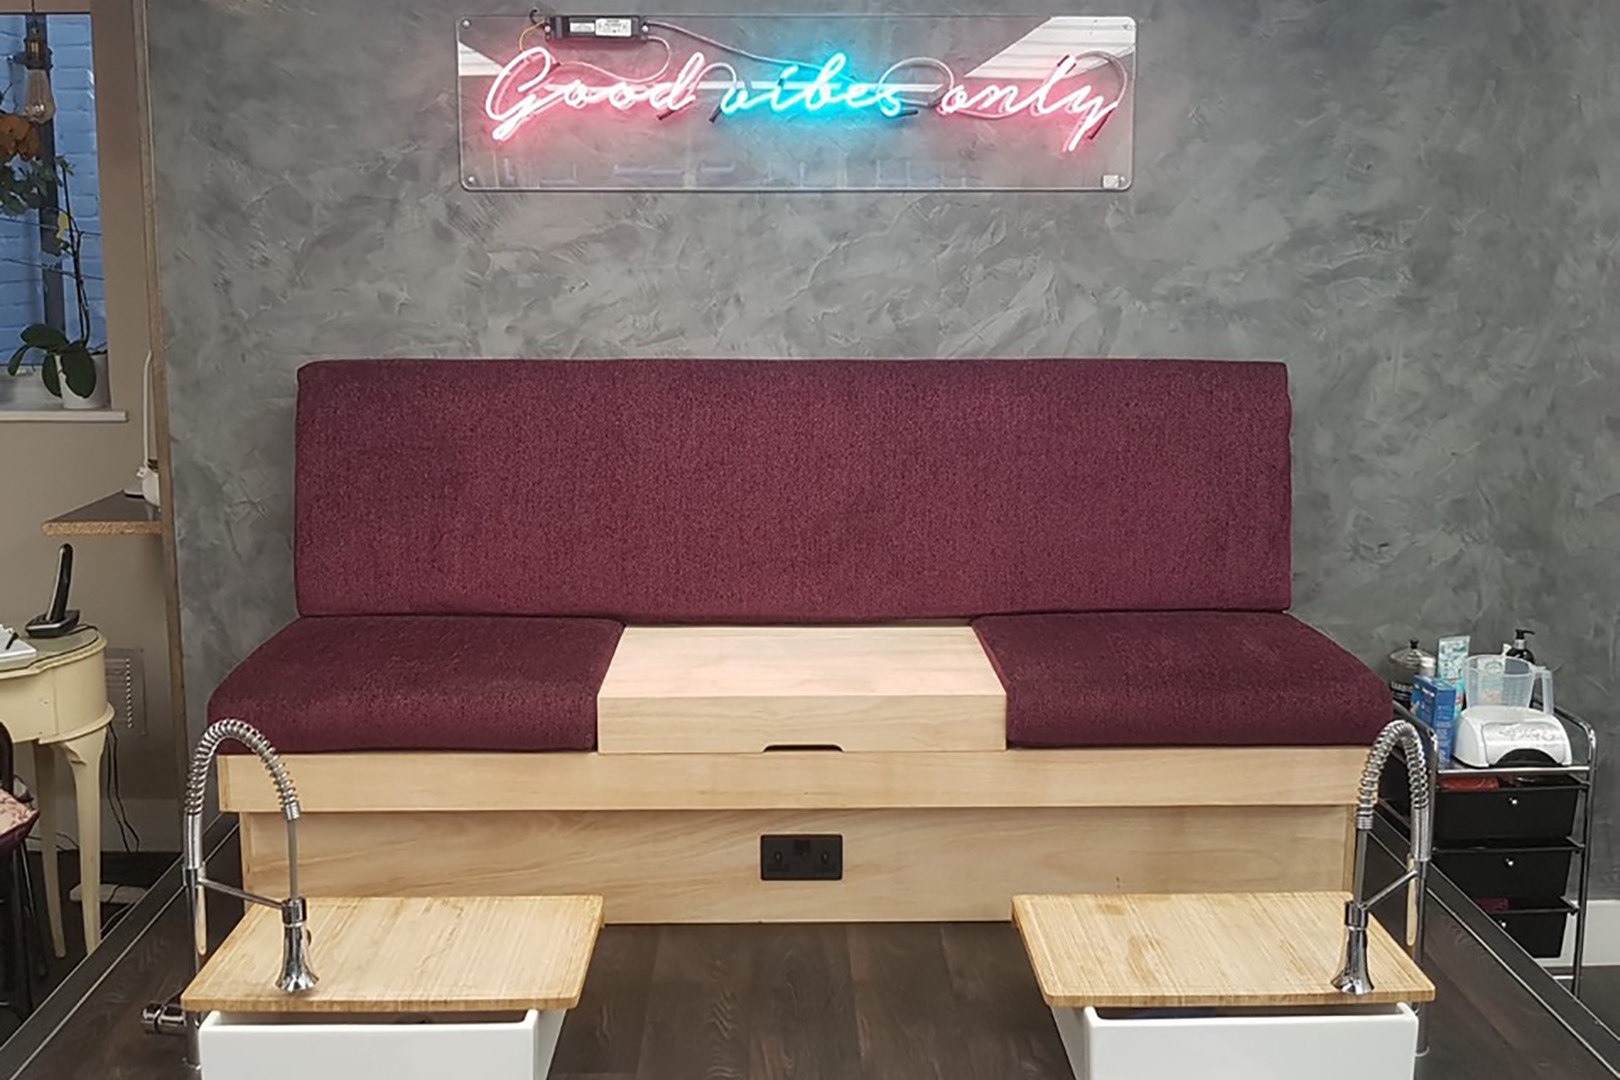 A maroon and wood beauty treatment sofa for pedicures